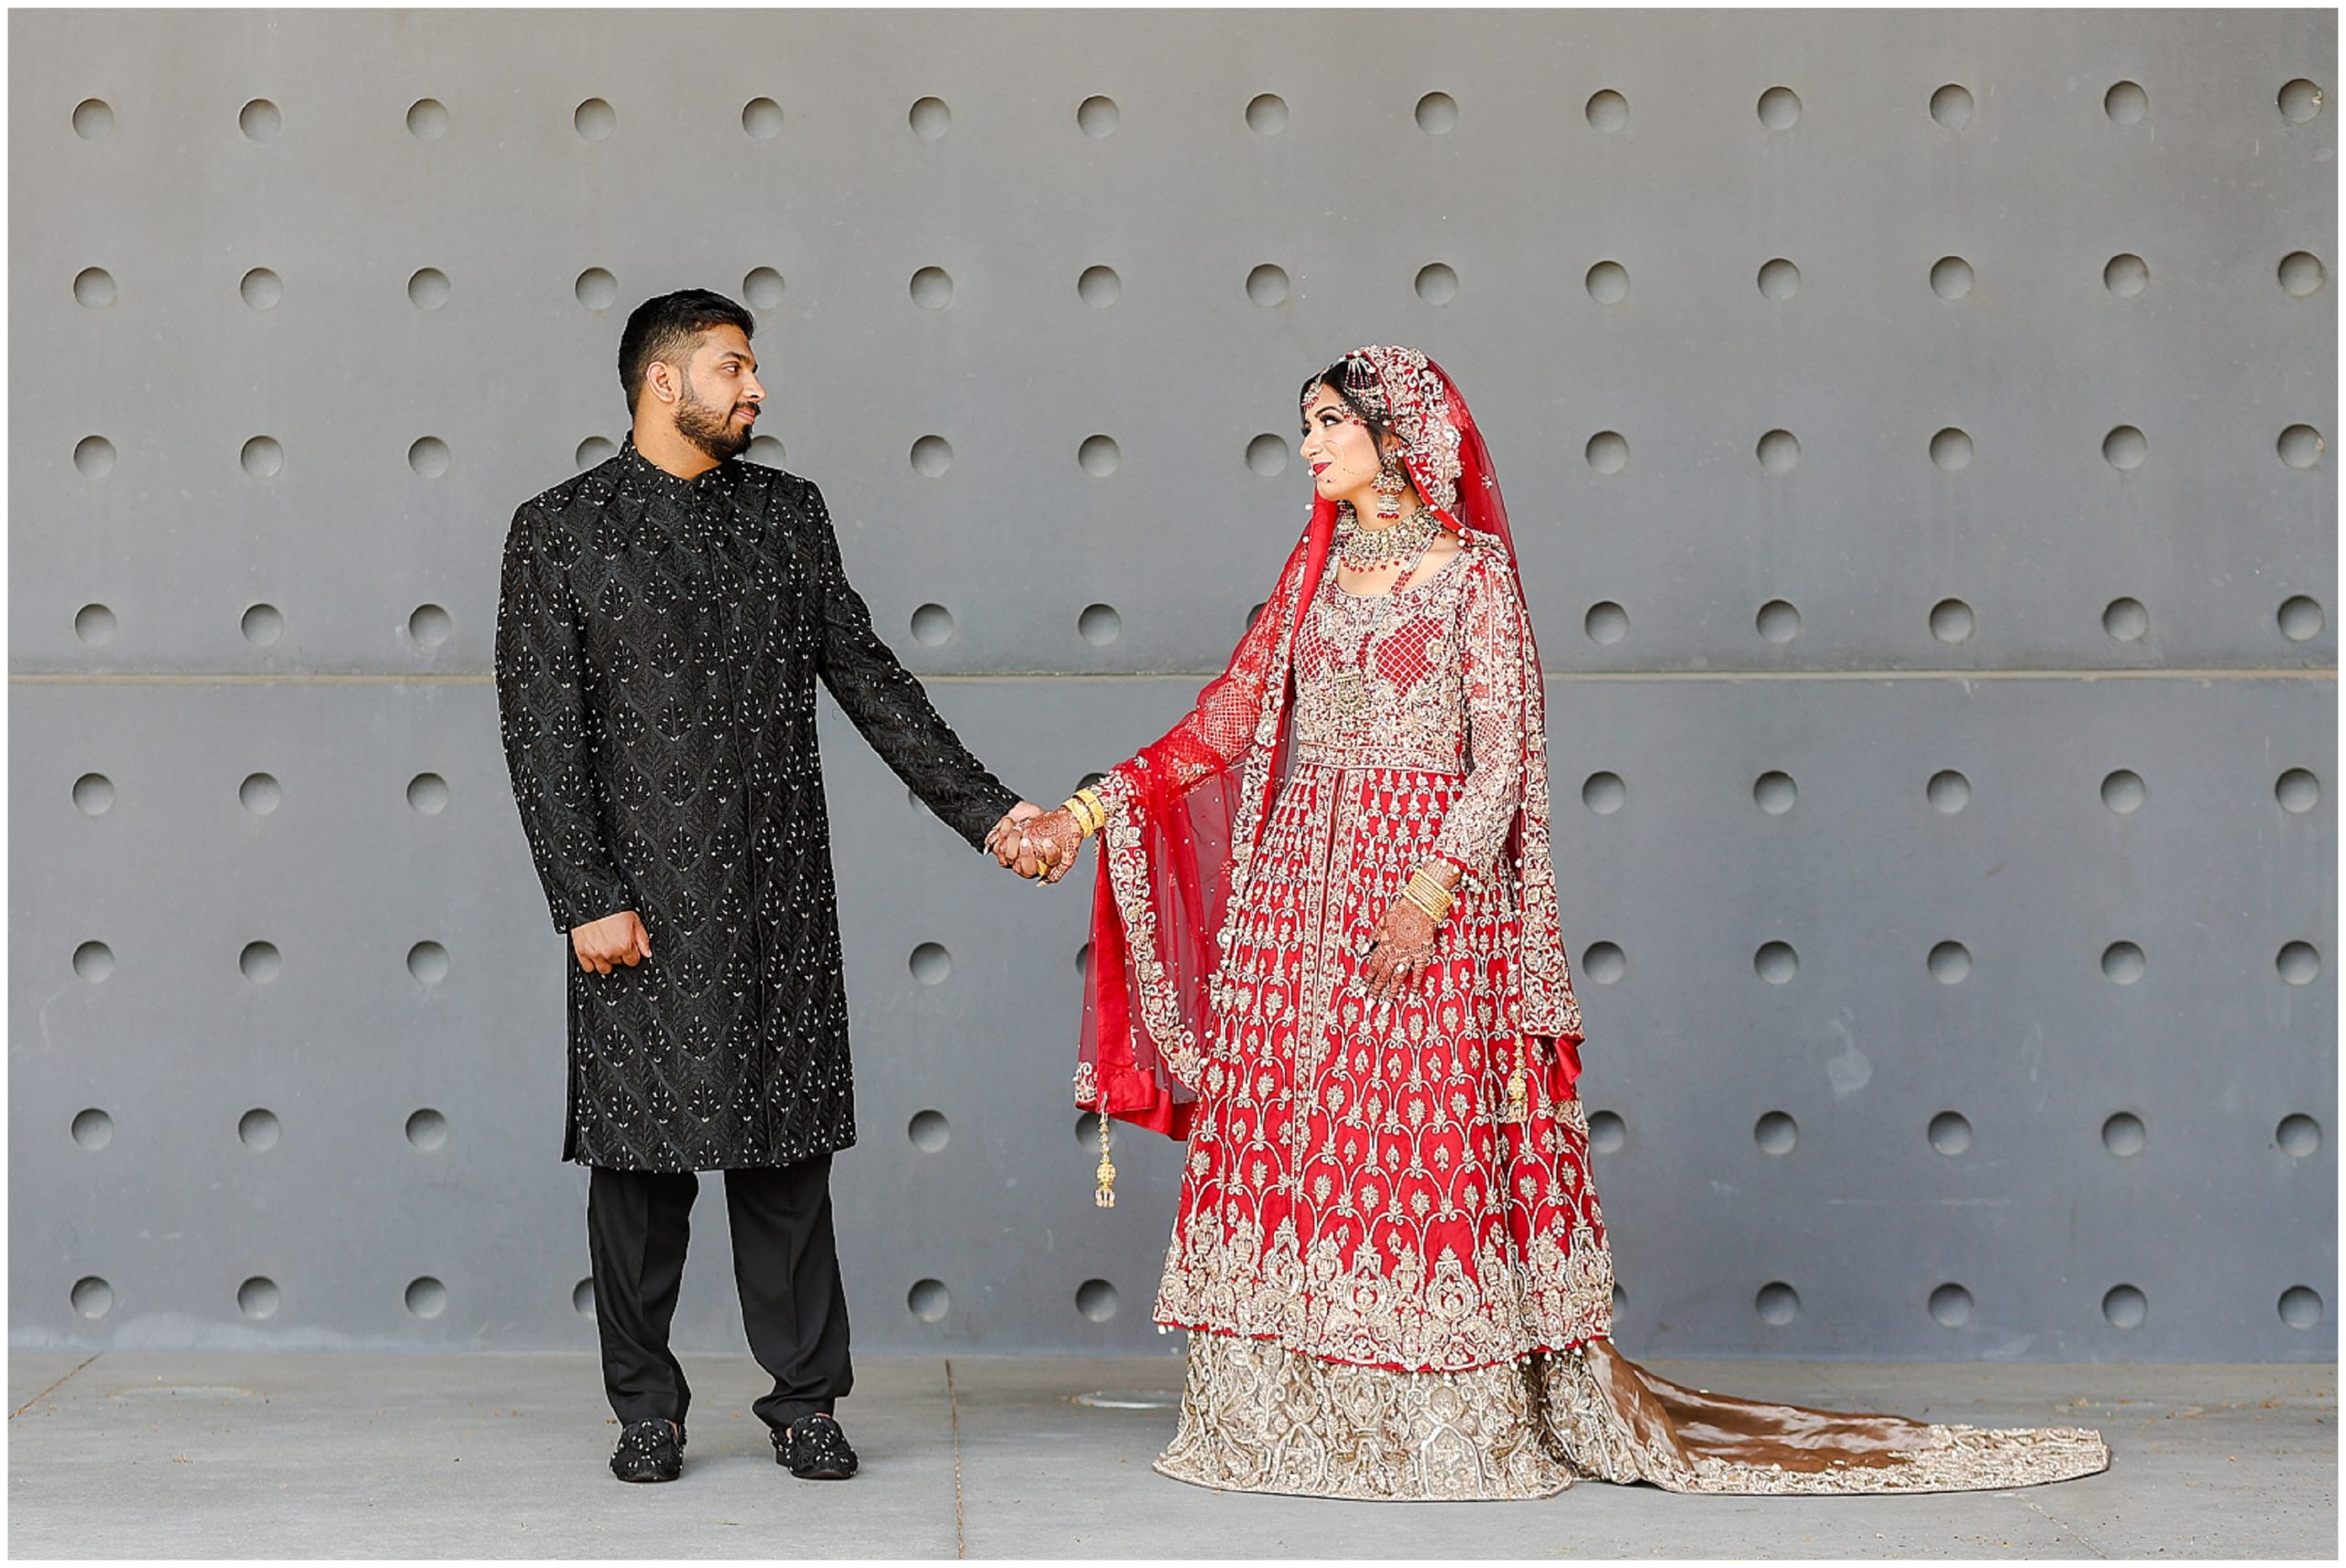 Pakistani Indian Wedding in Kansas City at the Overland Park Marriott photographed by Mariam Saifan Photography | Red Indian Pakistani Muslim Wedding Dress | Hair & Makeup Ideas | Best Wedding Photographer in Kansas City and Destination Weddings